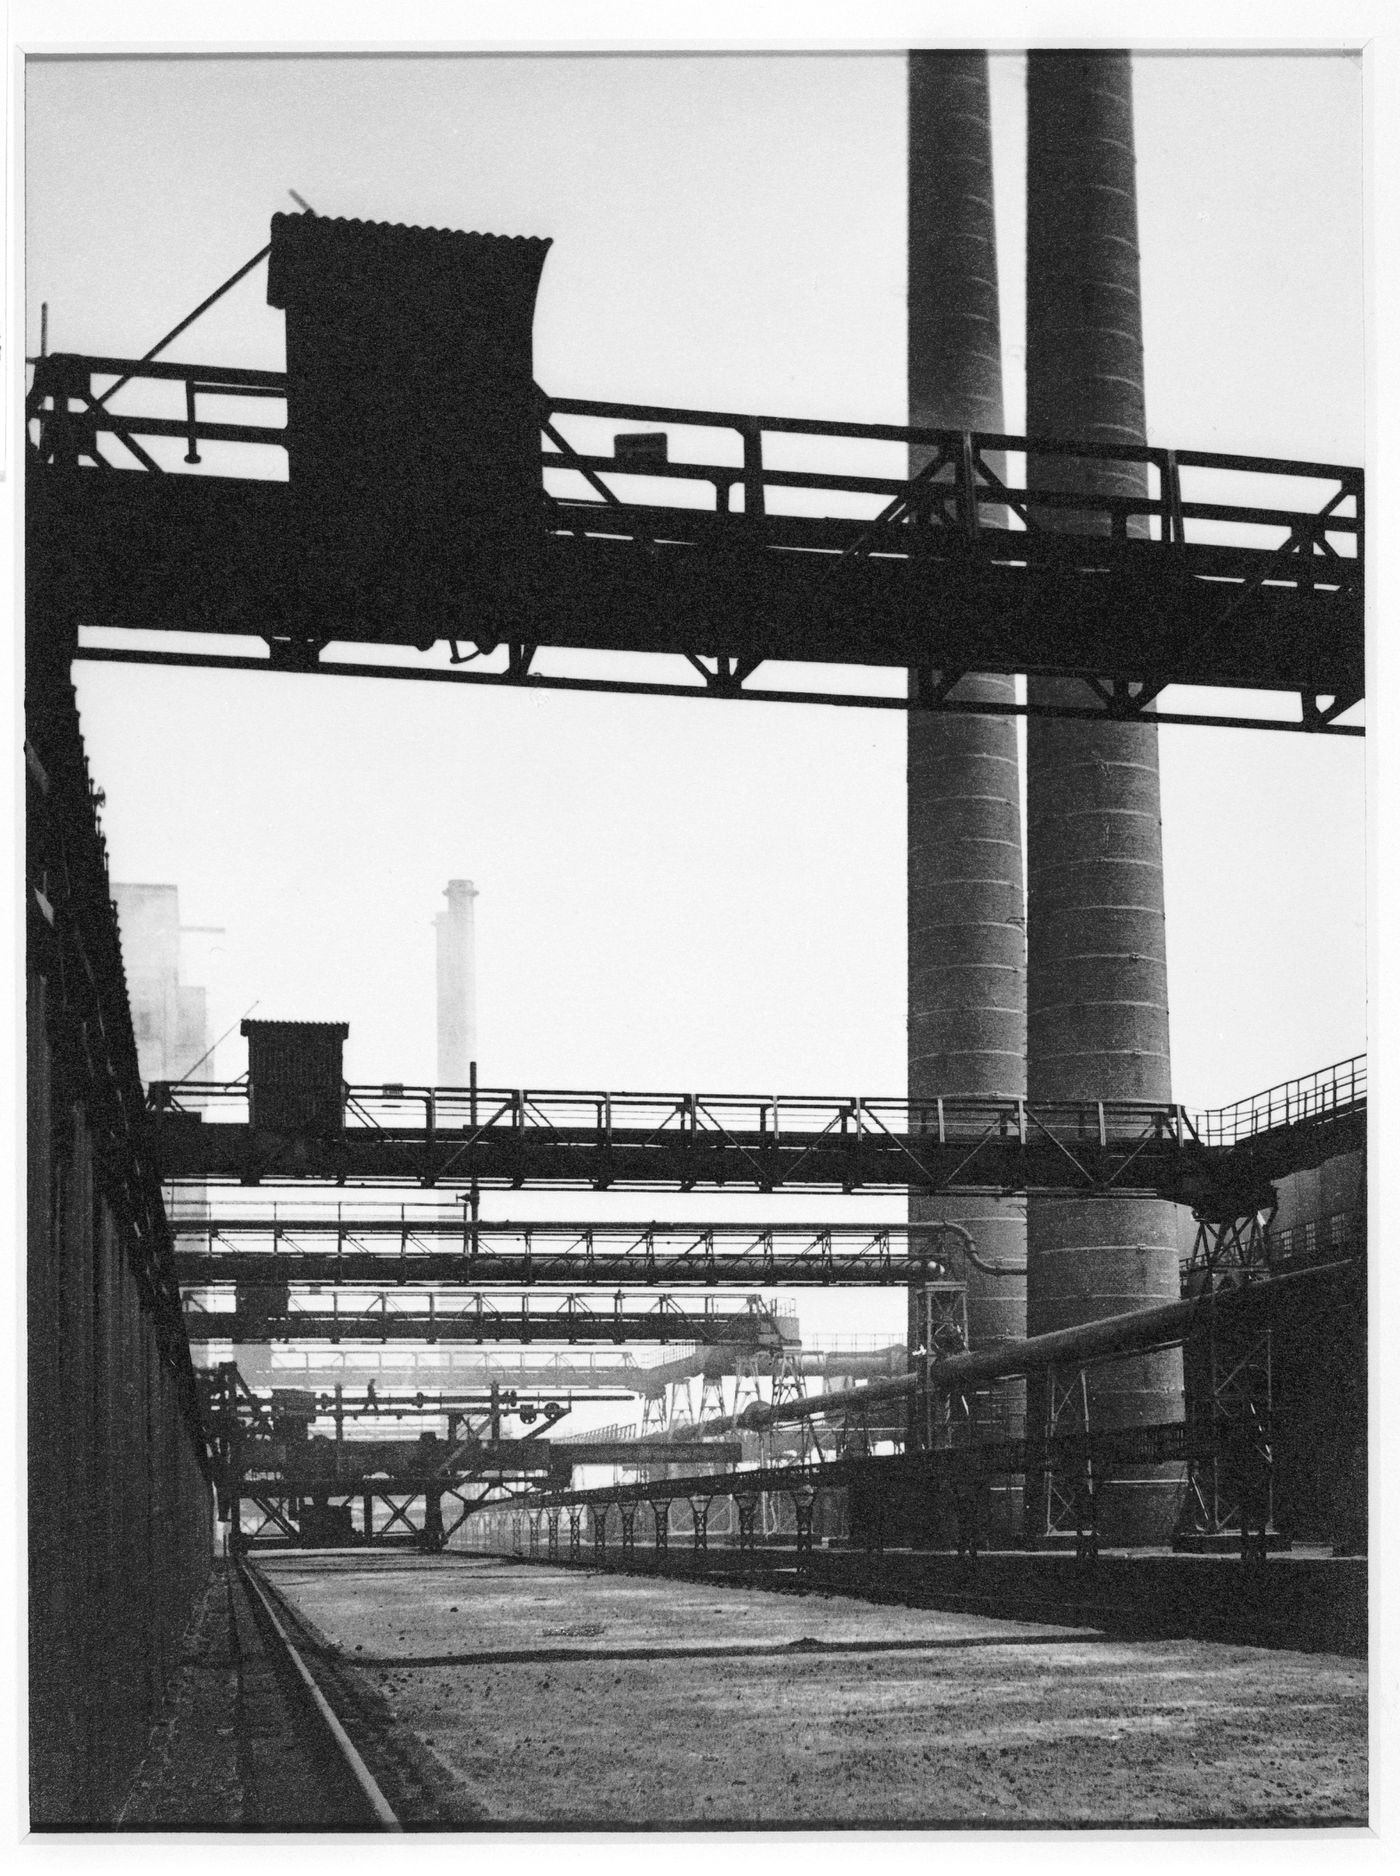 Unidentified industrial site, with two tall chimneys at right